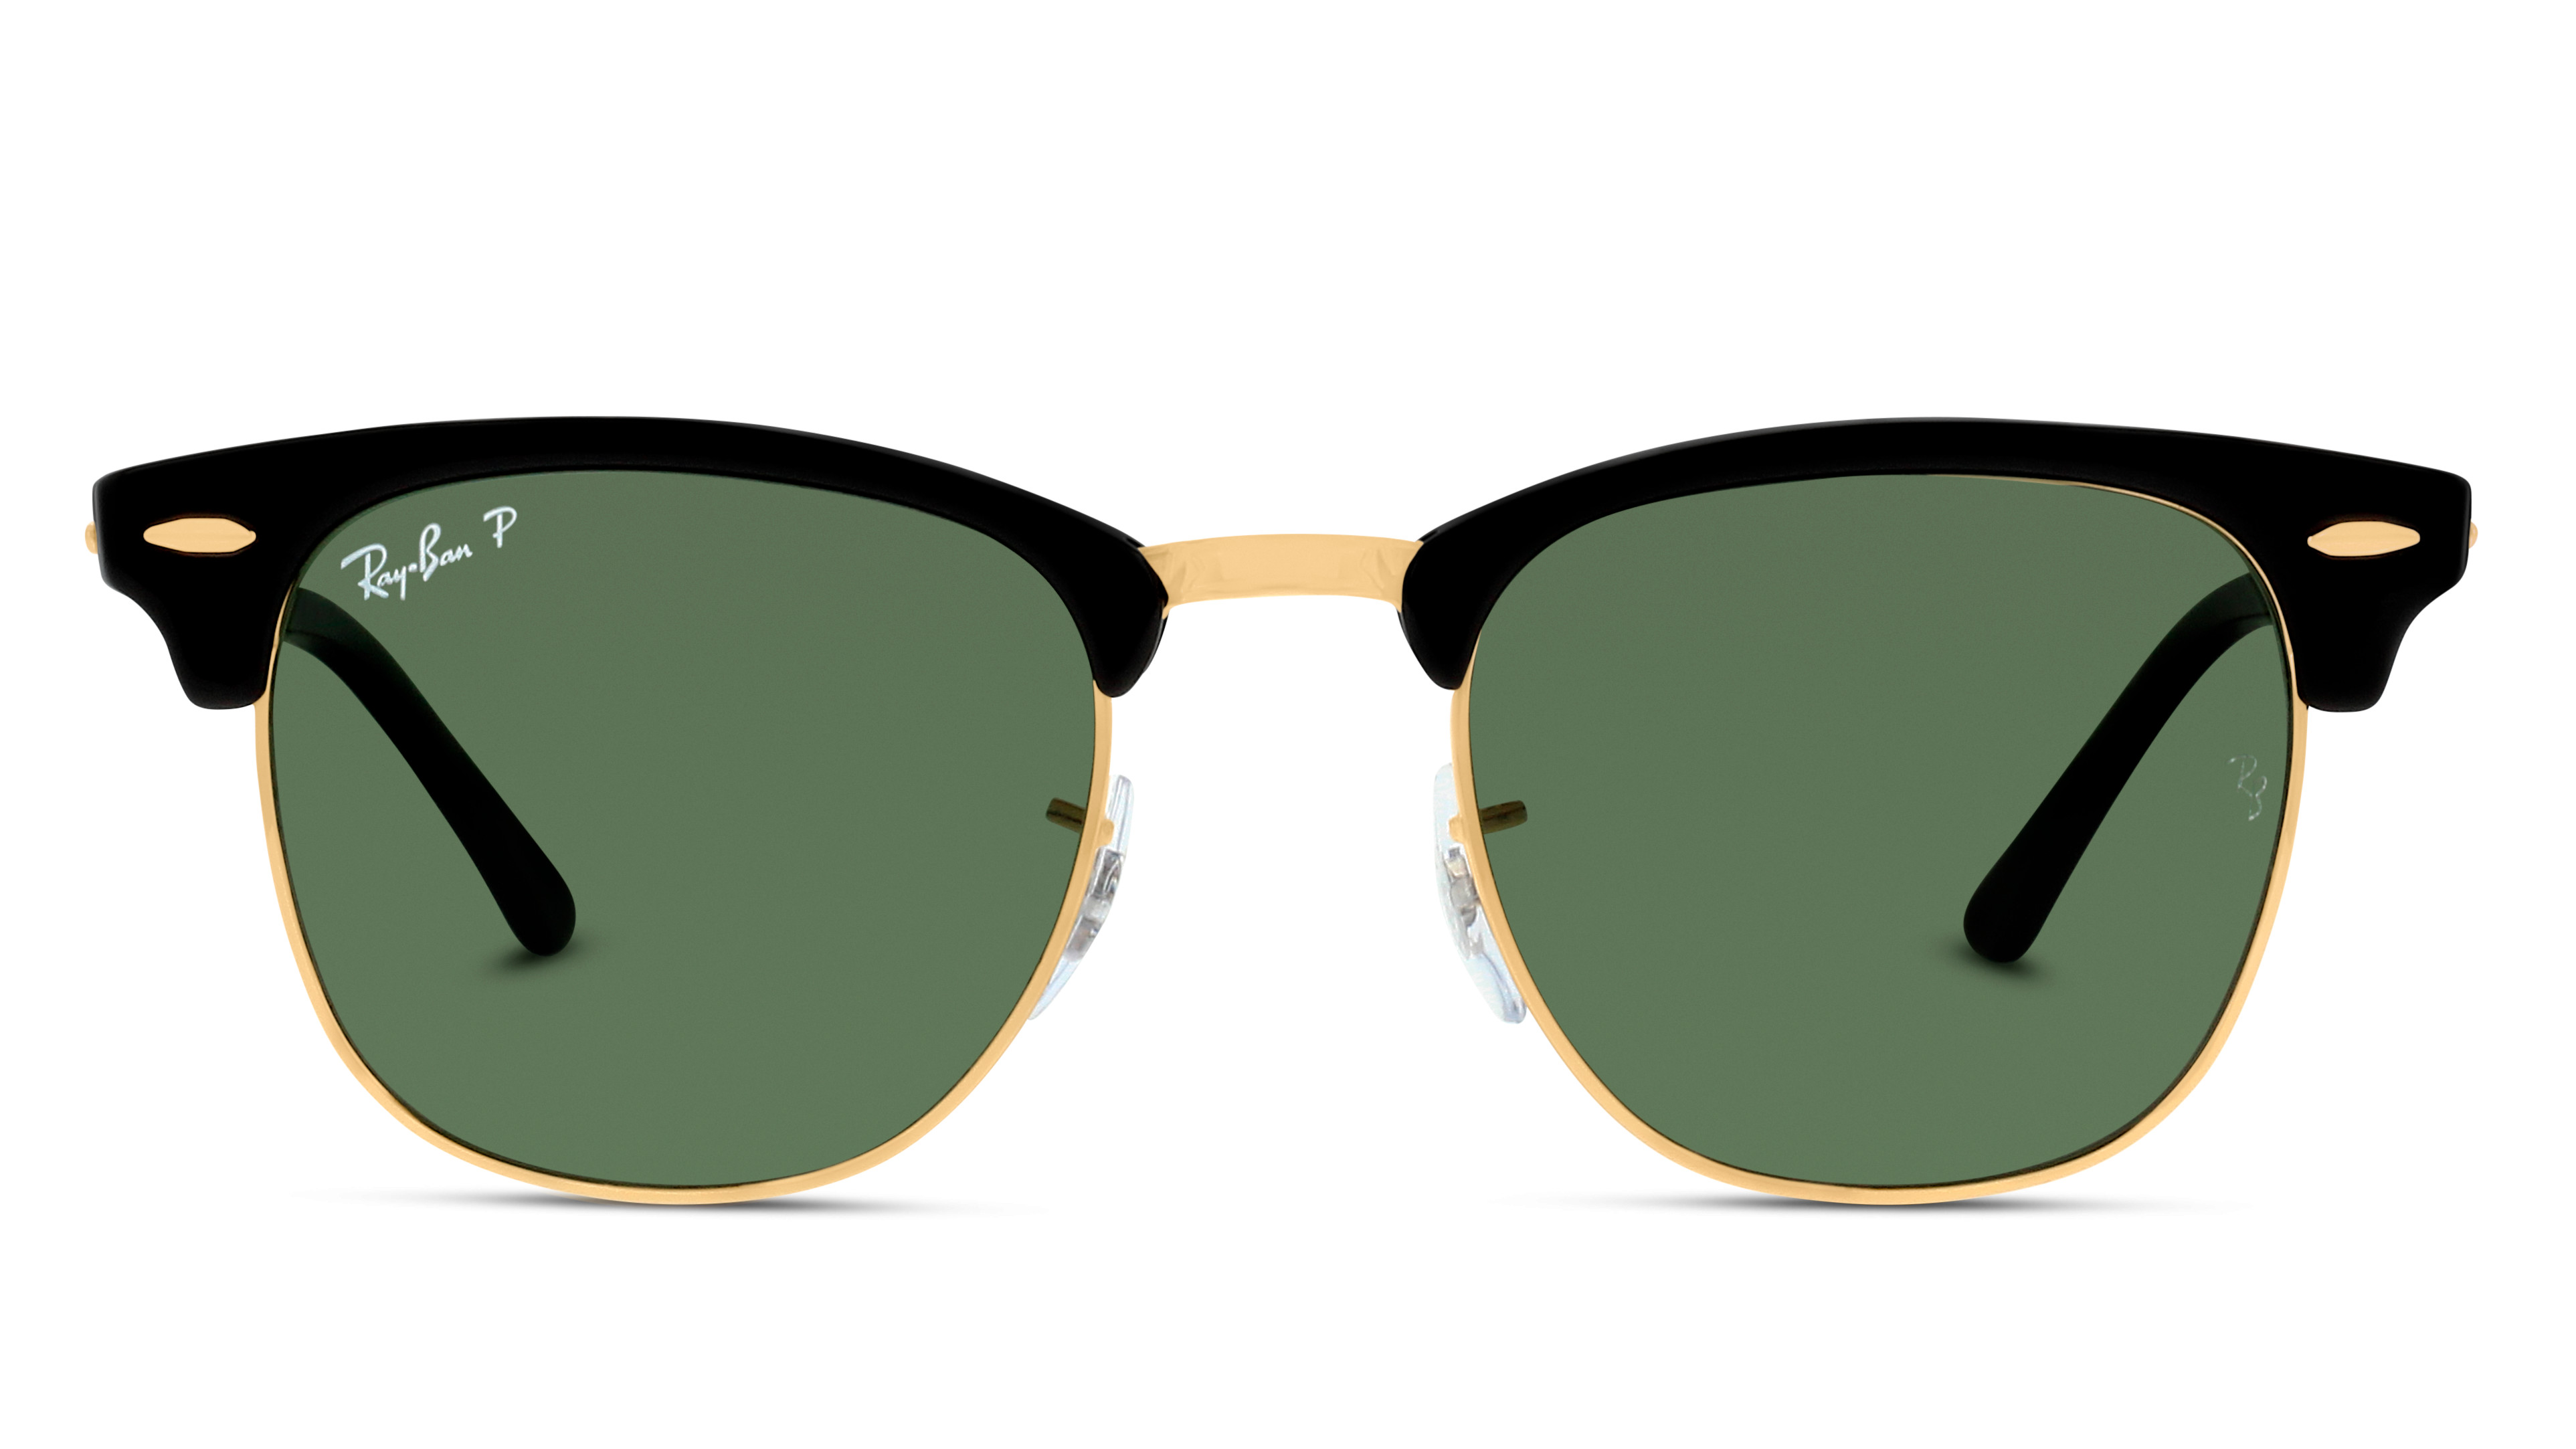 [products.image.front] Ray-Ban Clubmaster 0RB3016 901/58 Sonnenbrille